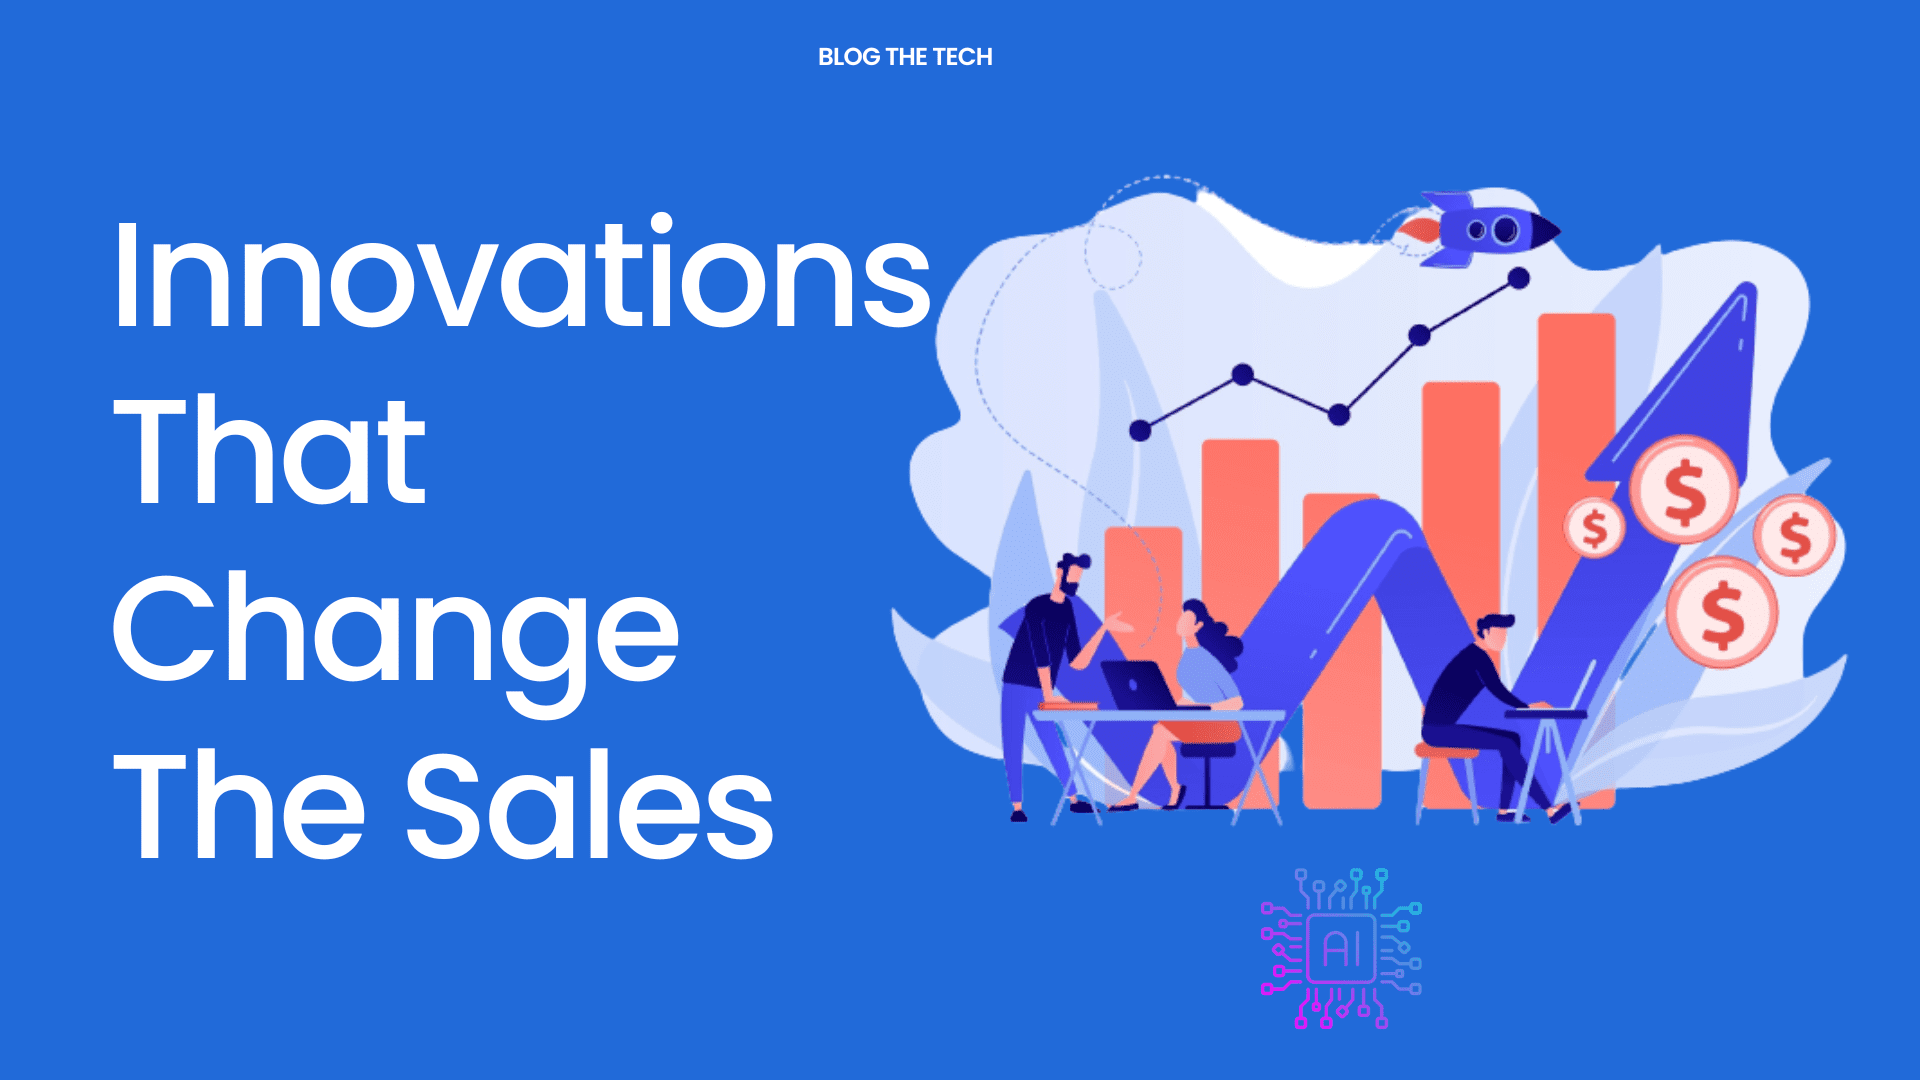 Innovations That Change The Sales